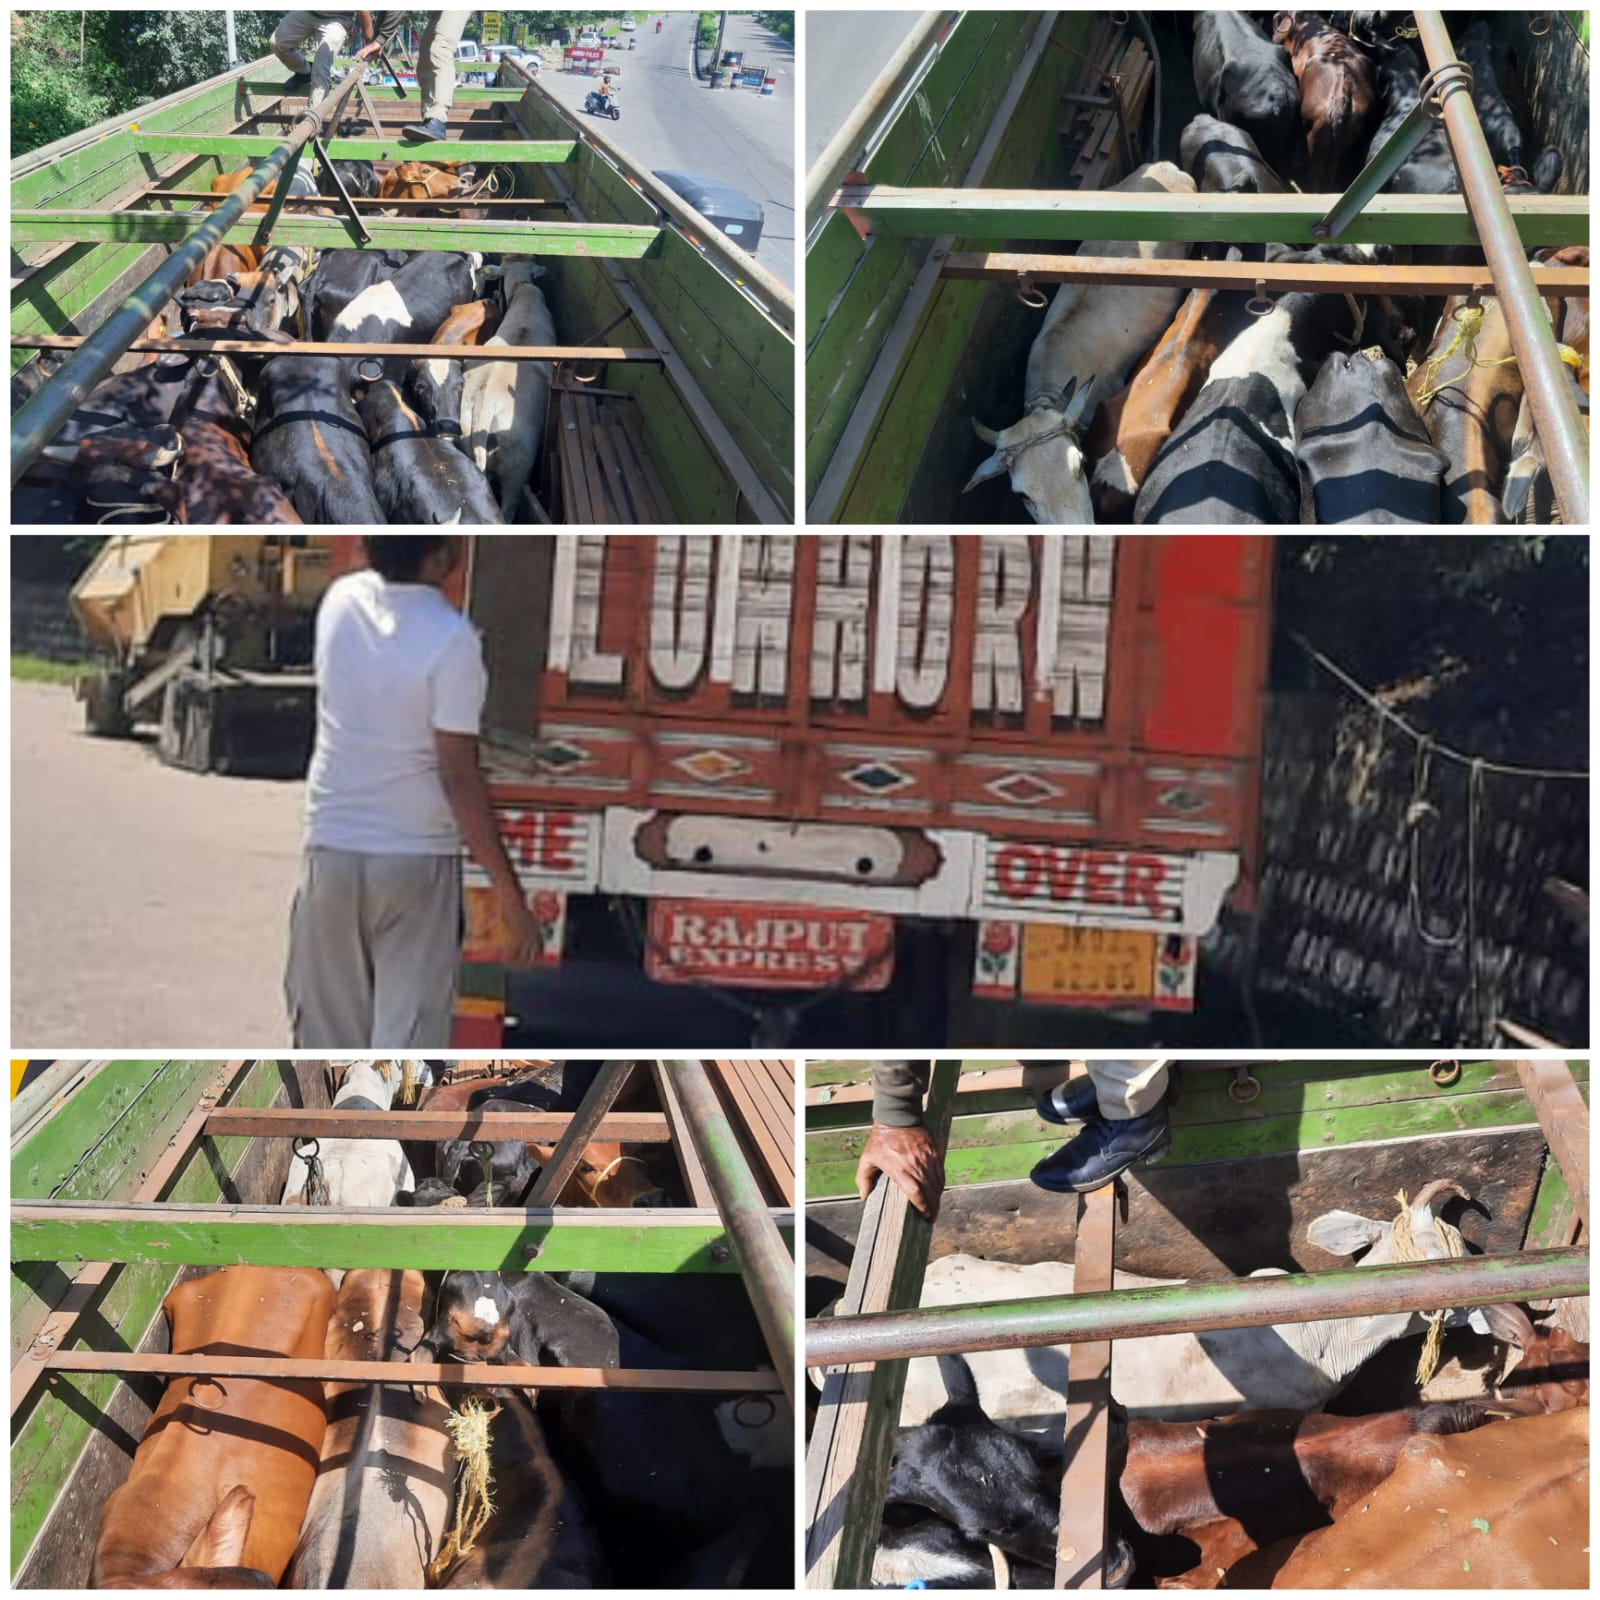 '22 bovines loaded truck seized by Bagh-e-Bahu SHO Sikander Singh Chauhan'